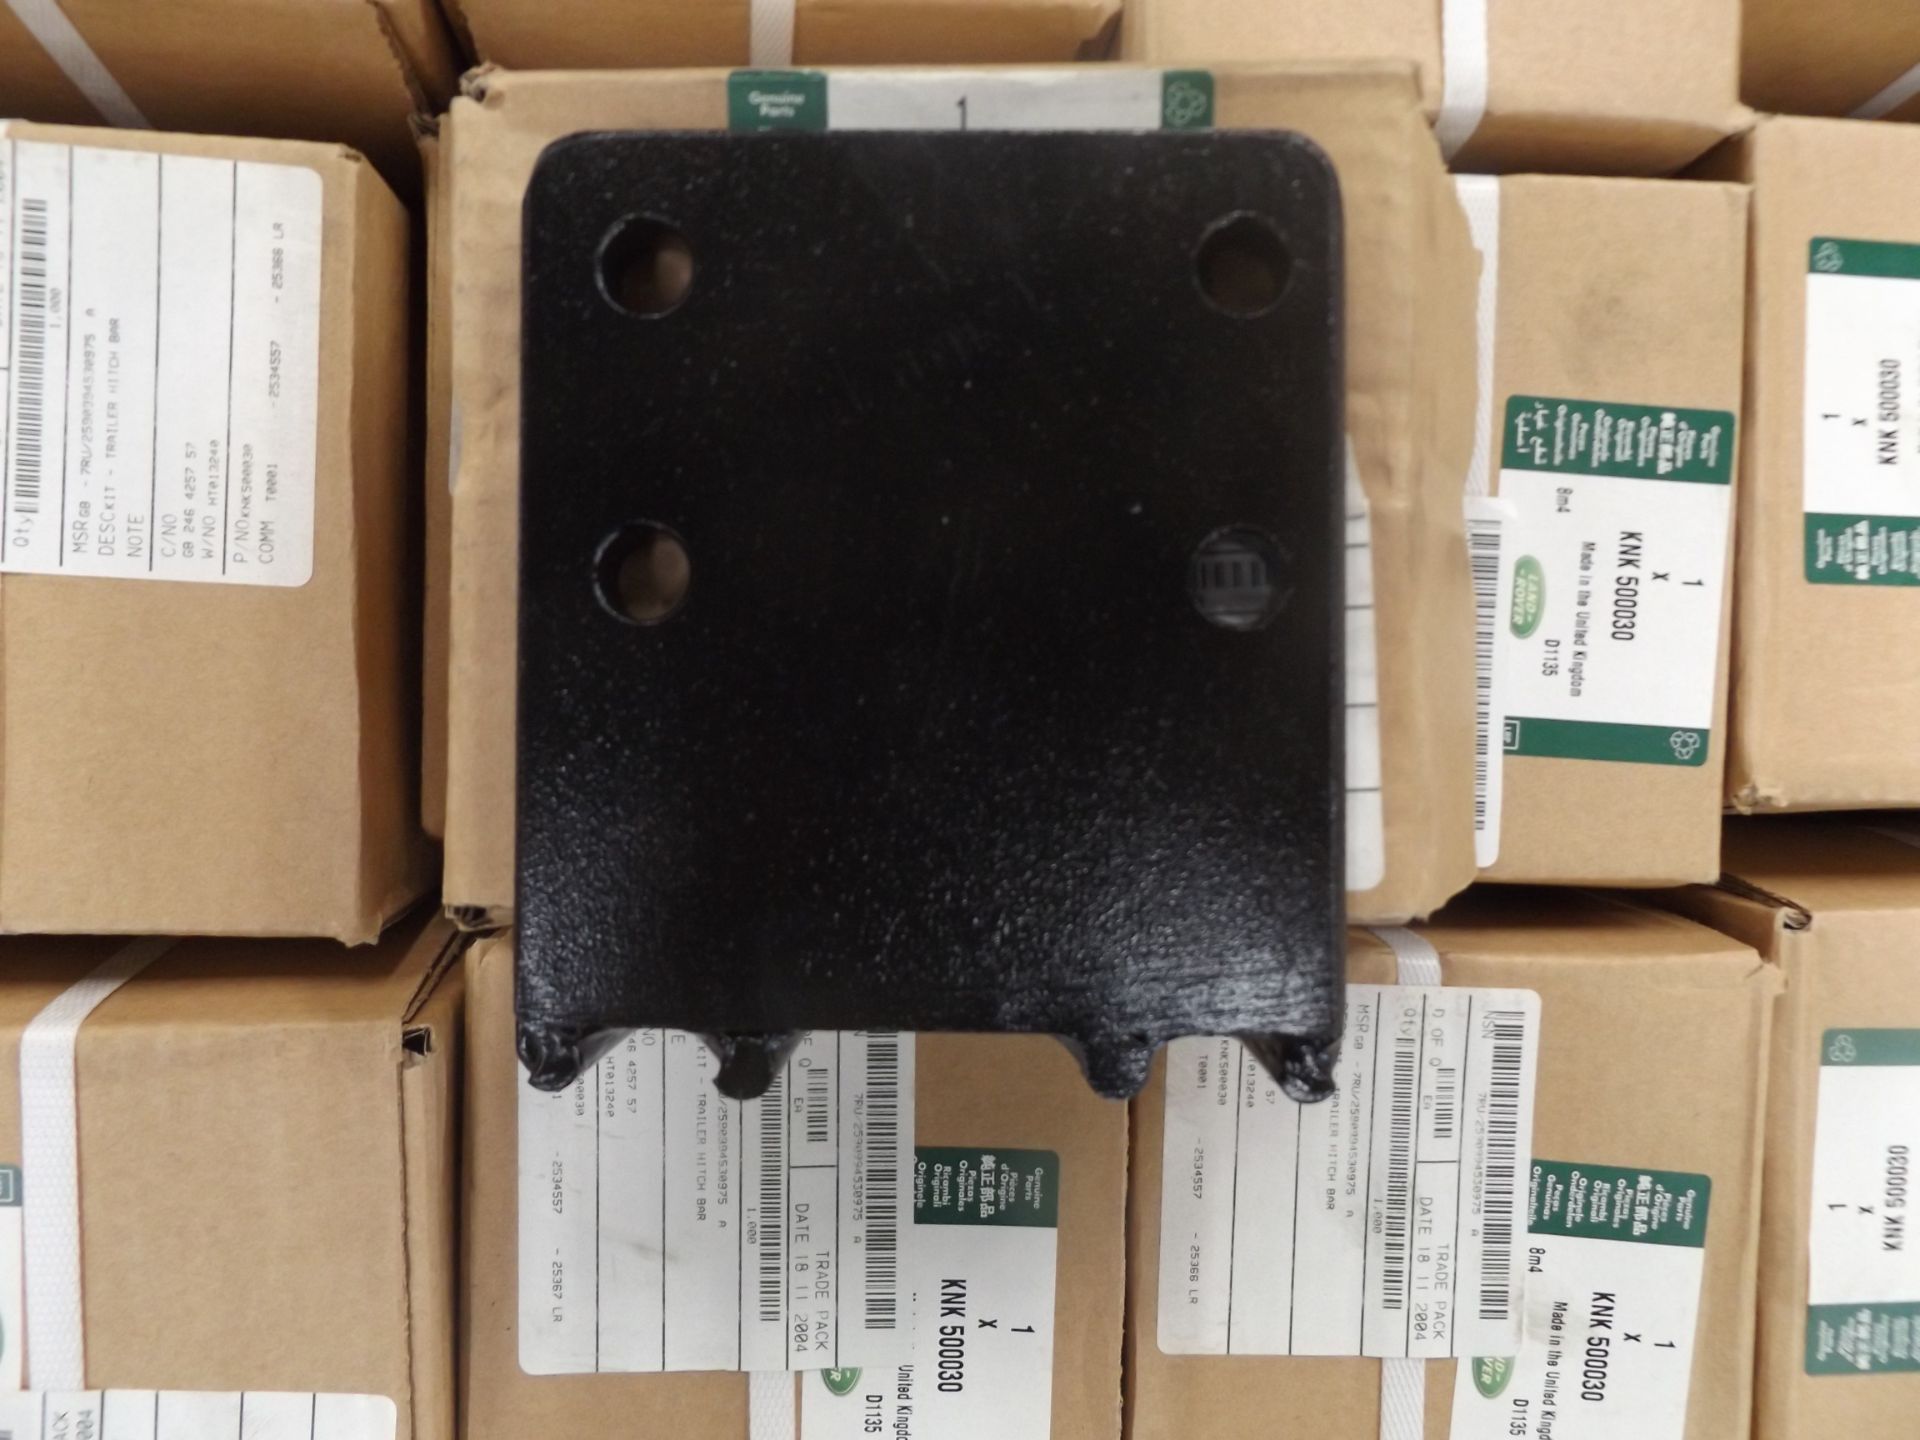 Approx. 275 x Land Rover Defender Nato Hitch Backing Plates KNK500030 - Image 3 of 4